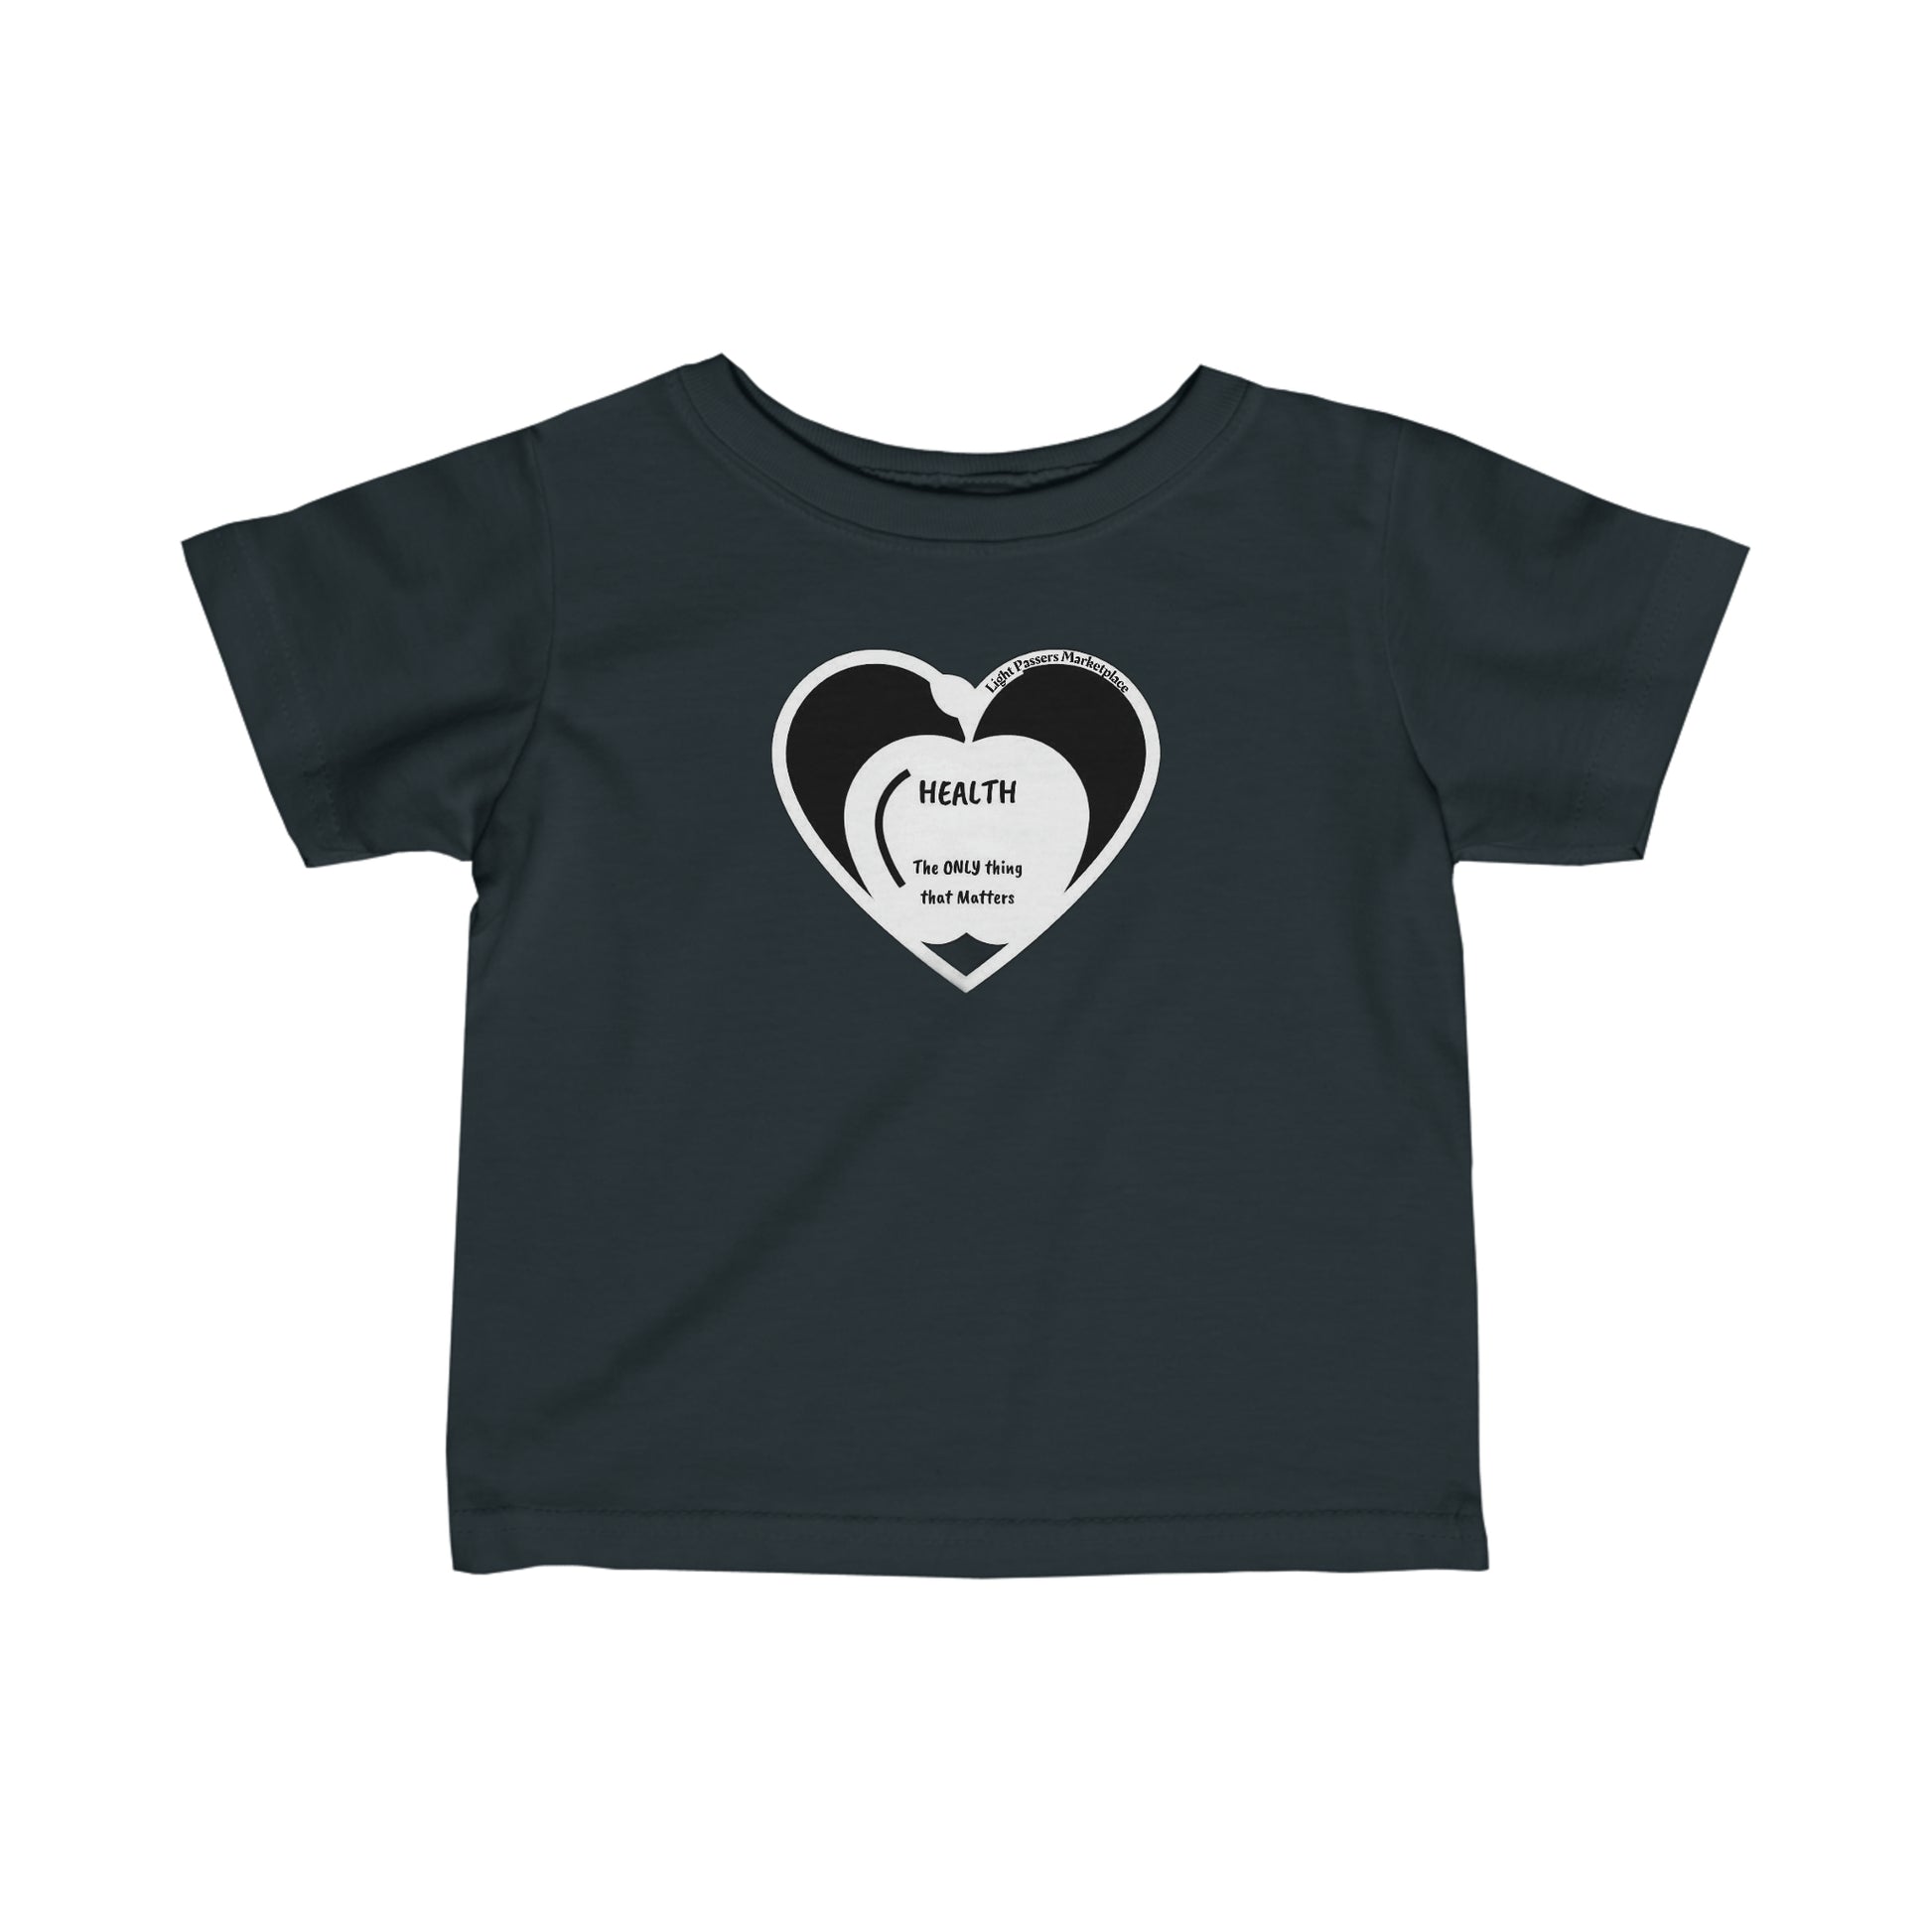 Infant fine jersey tee with heart graphic, side seams, ribbed knitting, and taped shoulders for durability and comfort. Apple Health Infant T-shirts Baby.